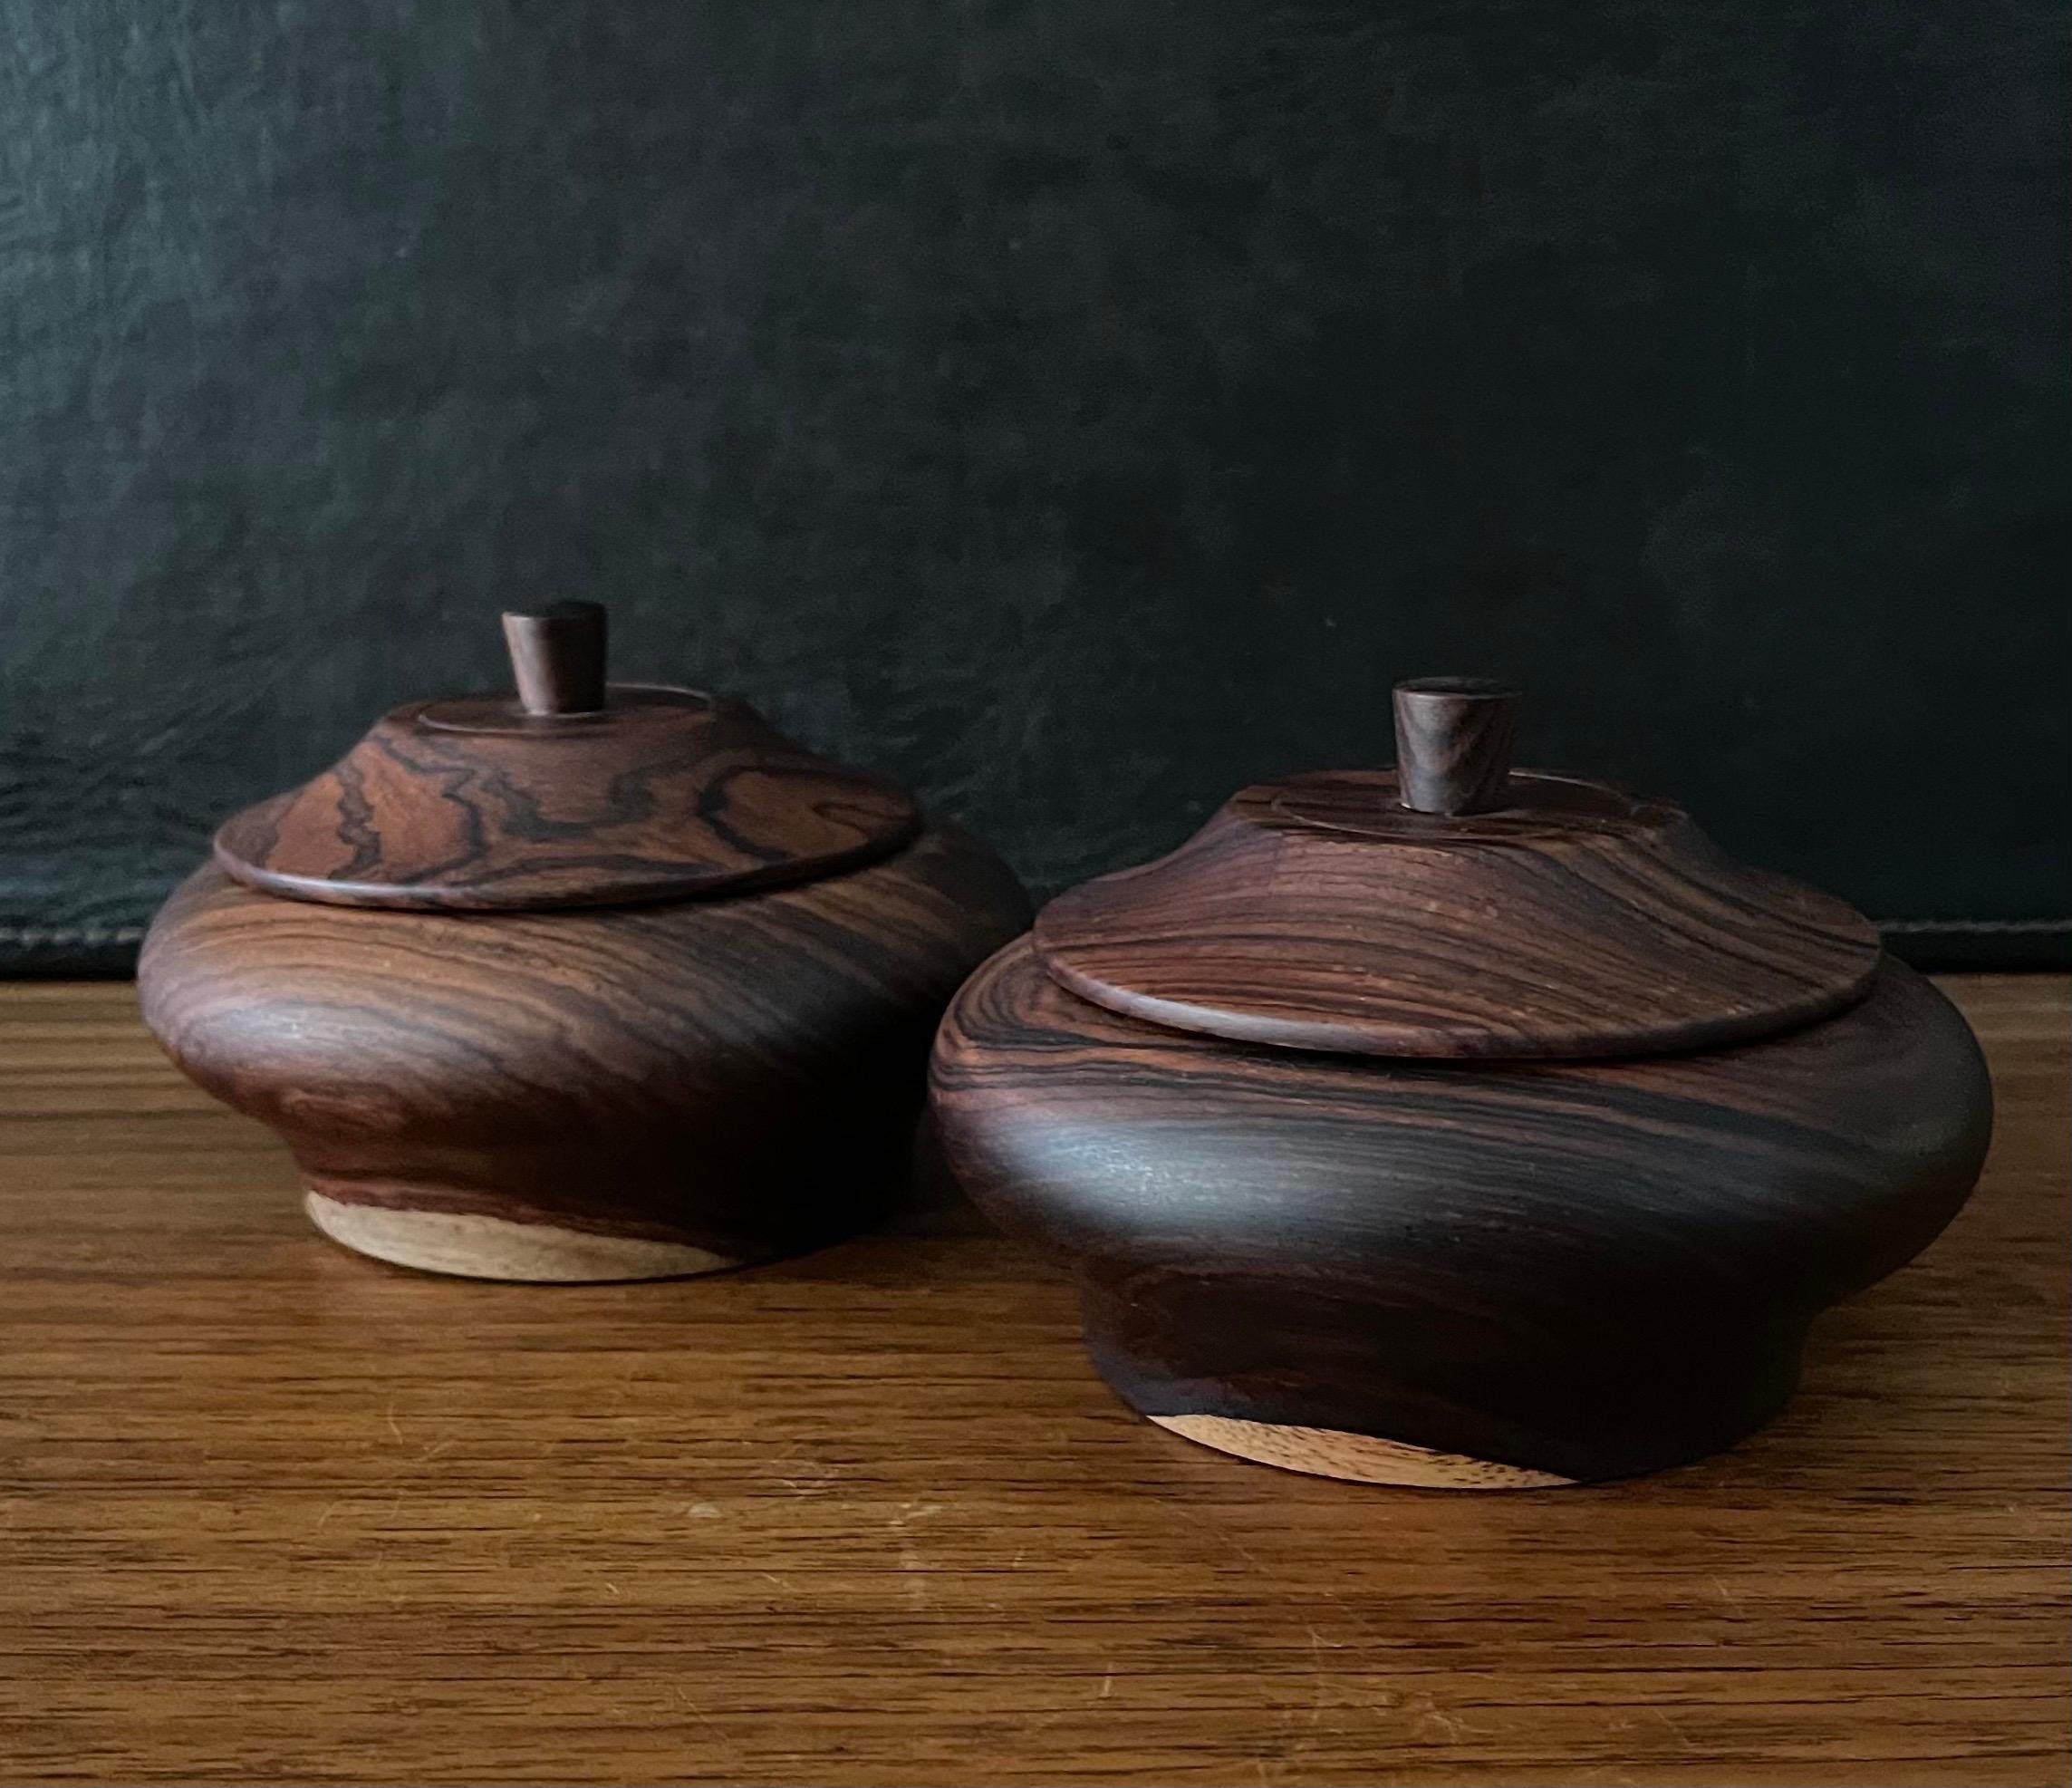 Pair of decorative cocobolo / rosewood lidded cannisters from Costa Rica, circa 1990s. The cannisters measures 5